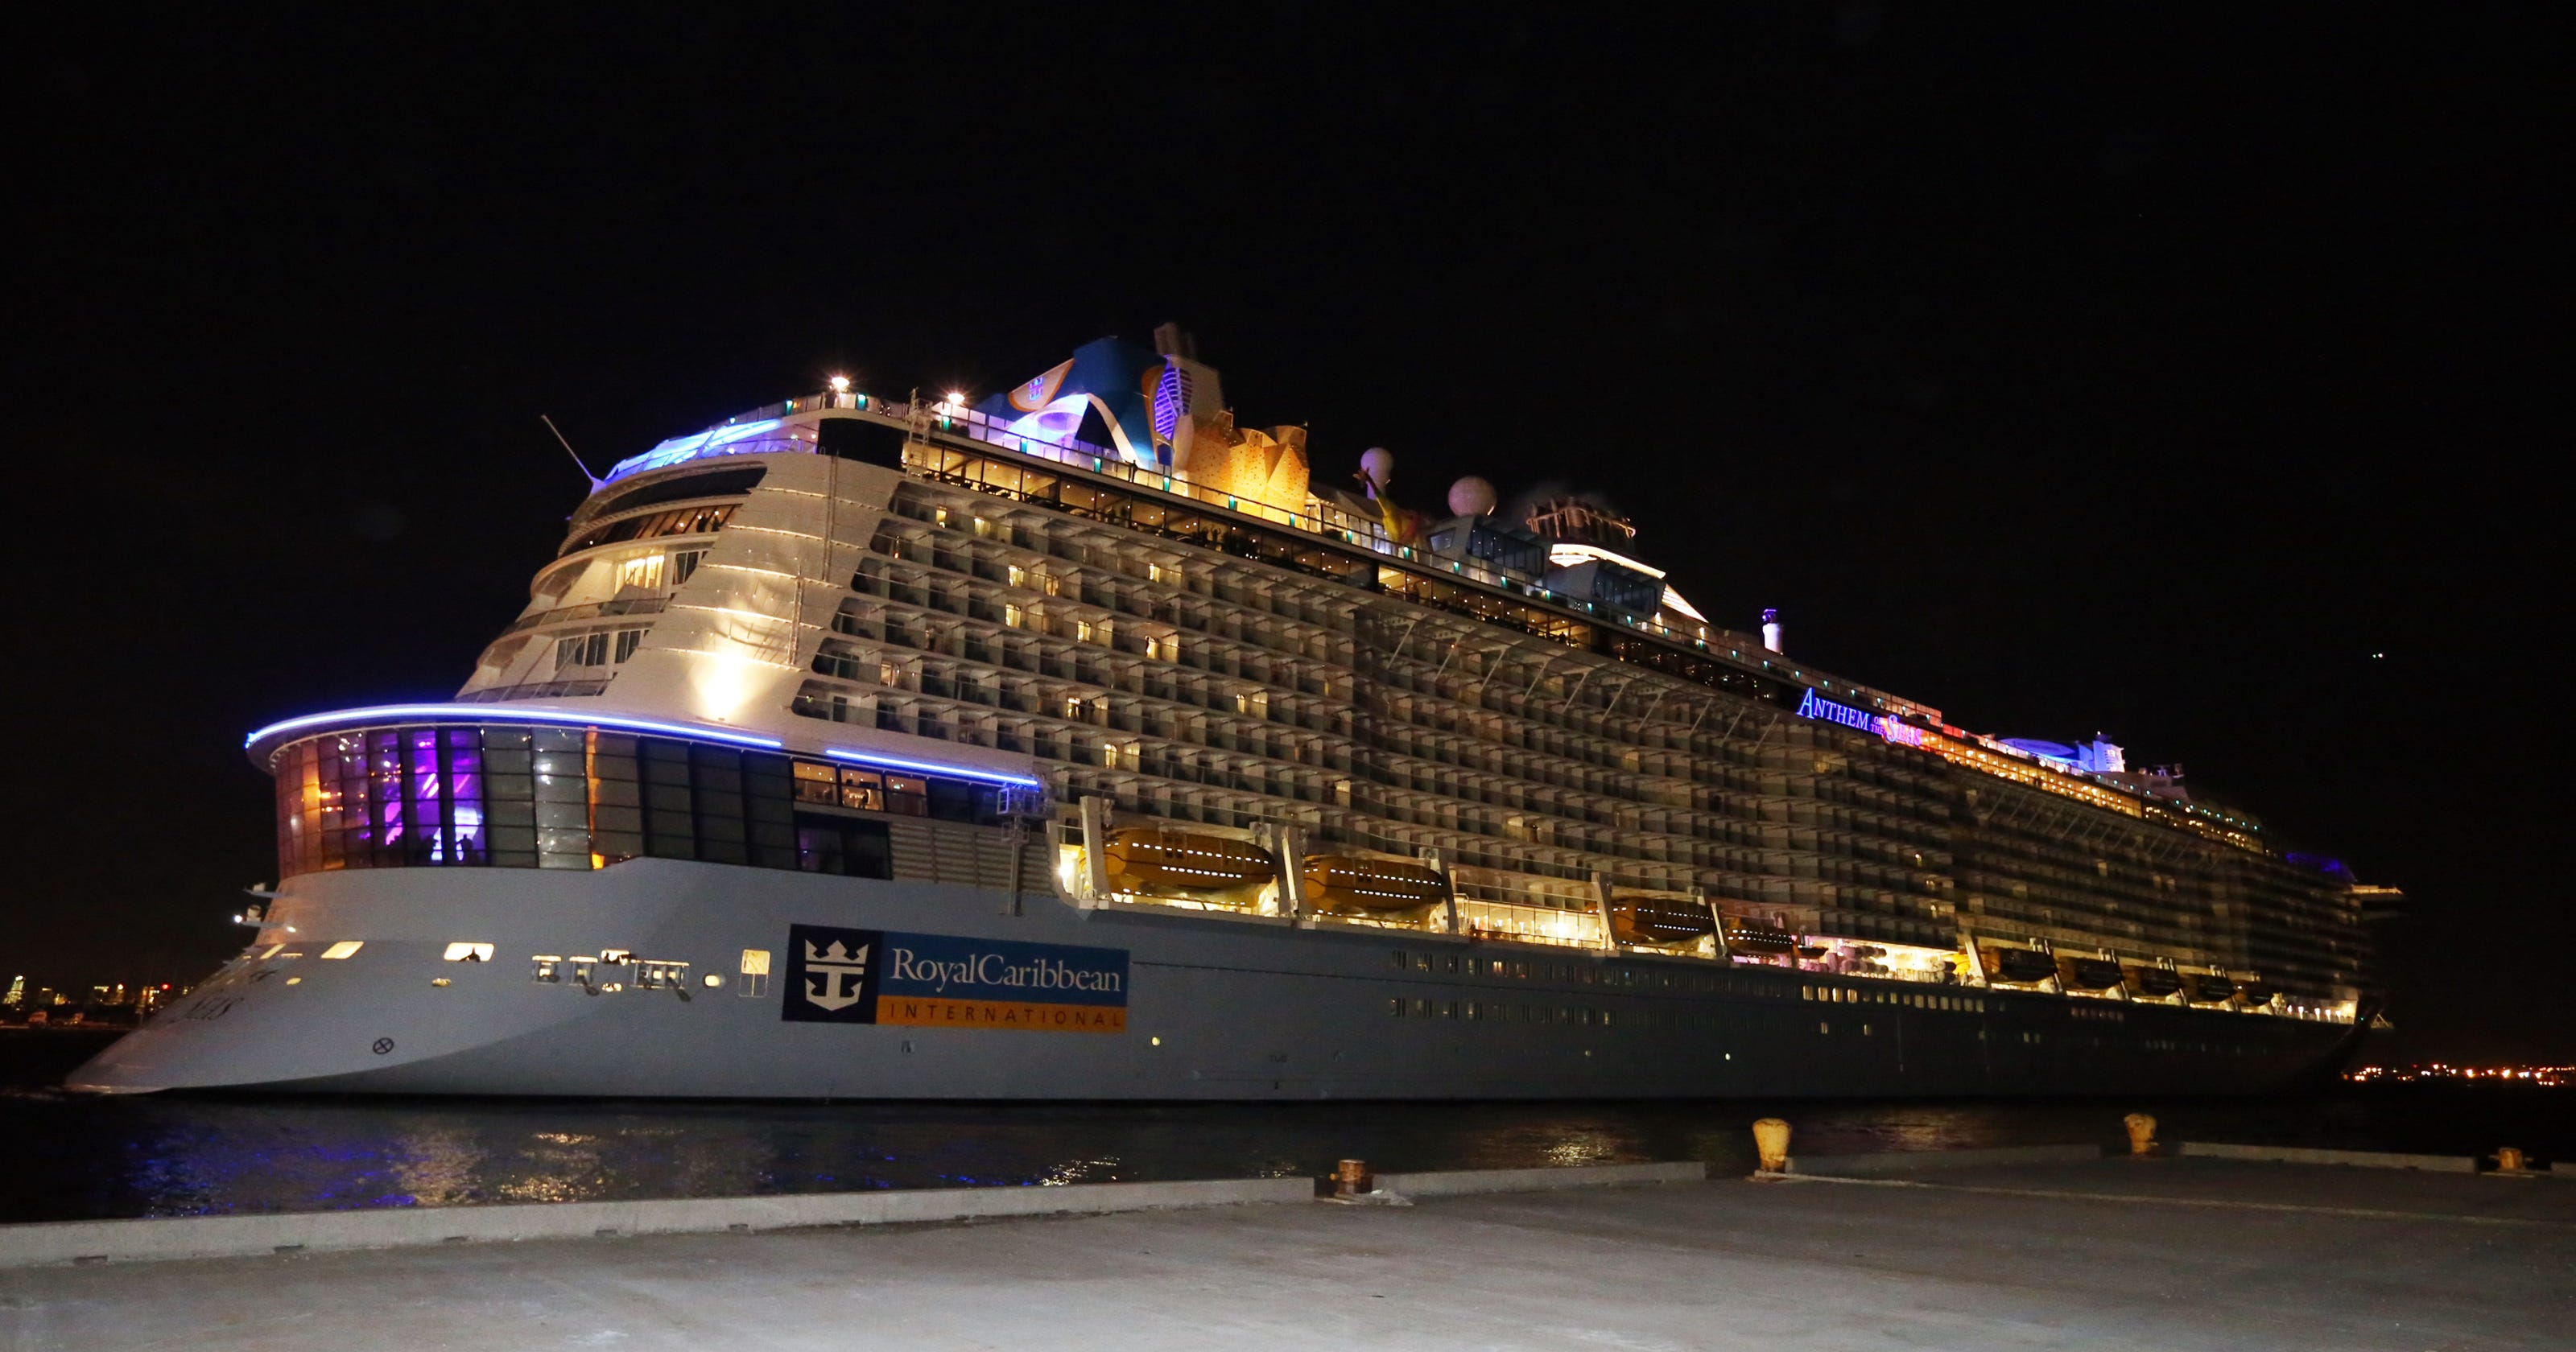 Carnival, Royal Caribbean, more emergency rescues on cruises